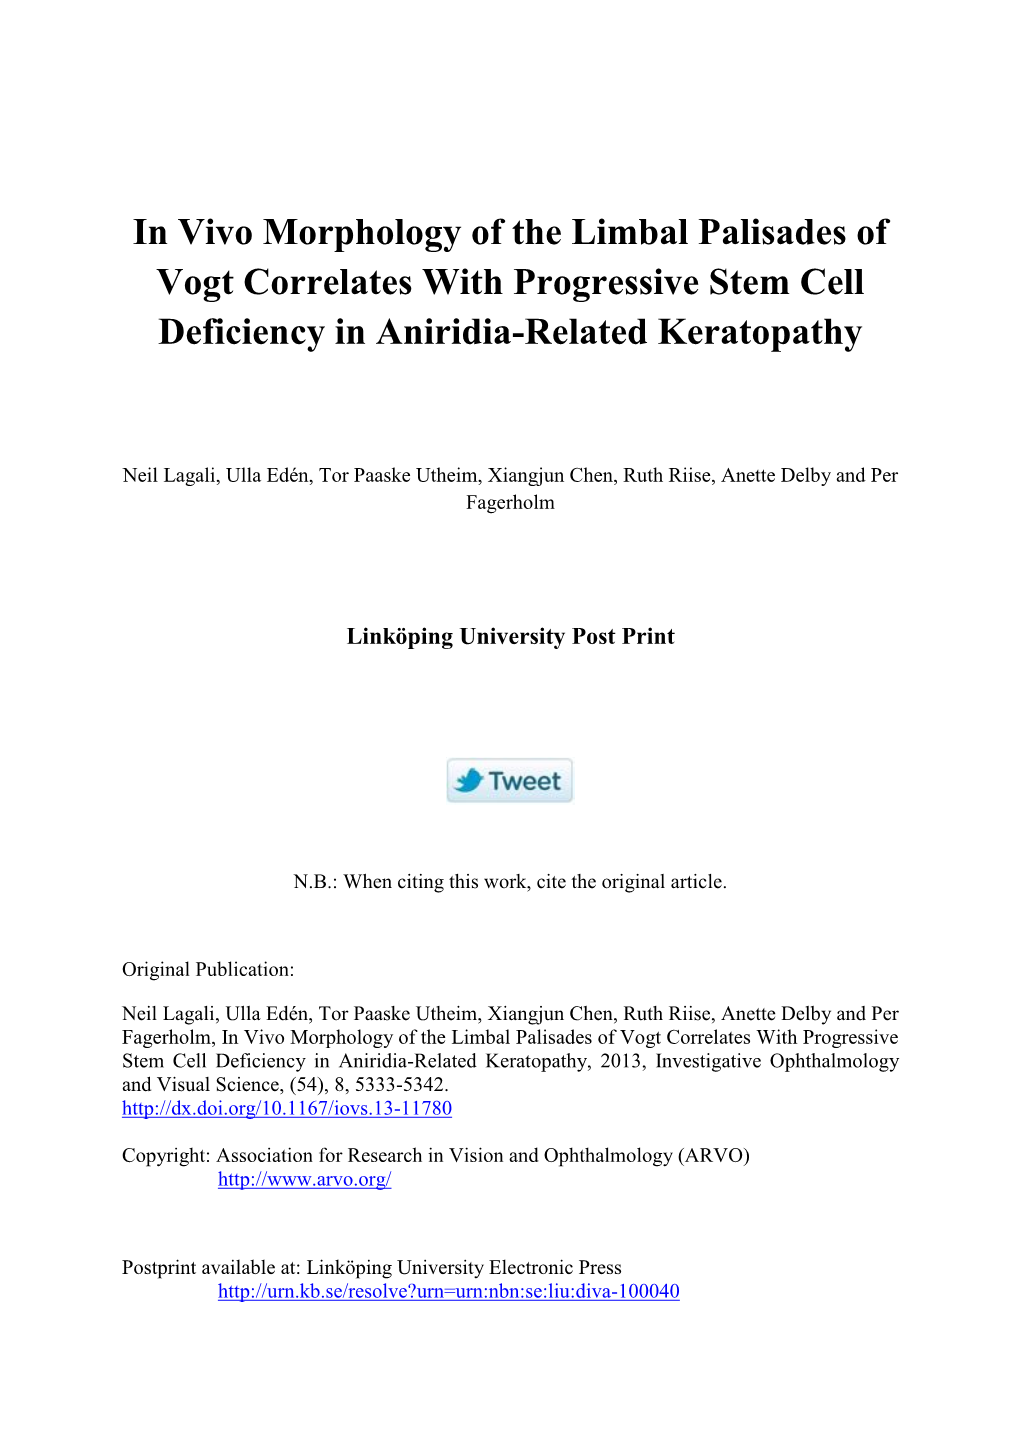 Purpose. to Investigate Morphologic Alterations in the Limbal Palisades Of